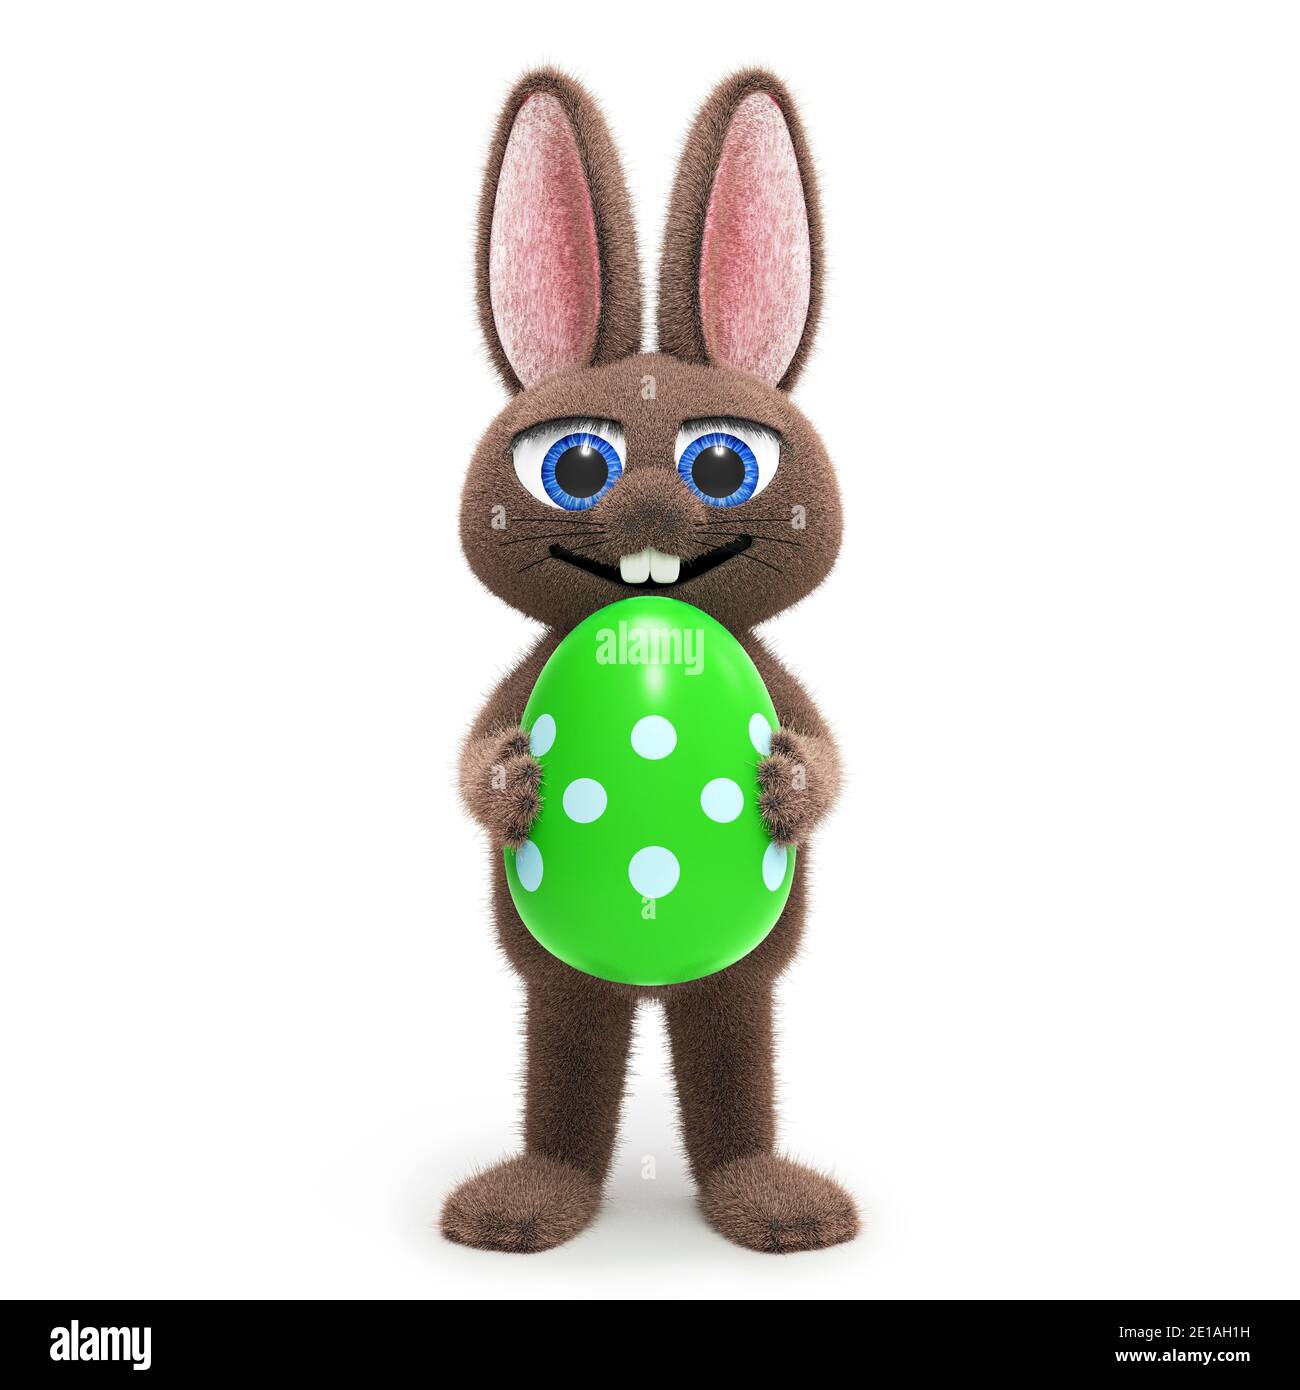 Cute easter bunny holding a colored egg decorated with ornaments, isolated on white background 3D rendering Stock Photo